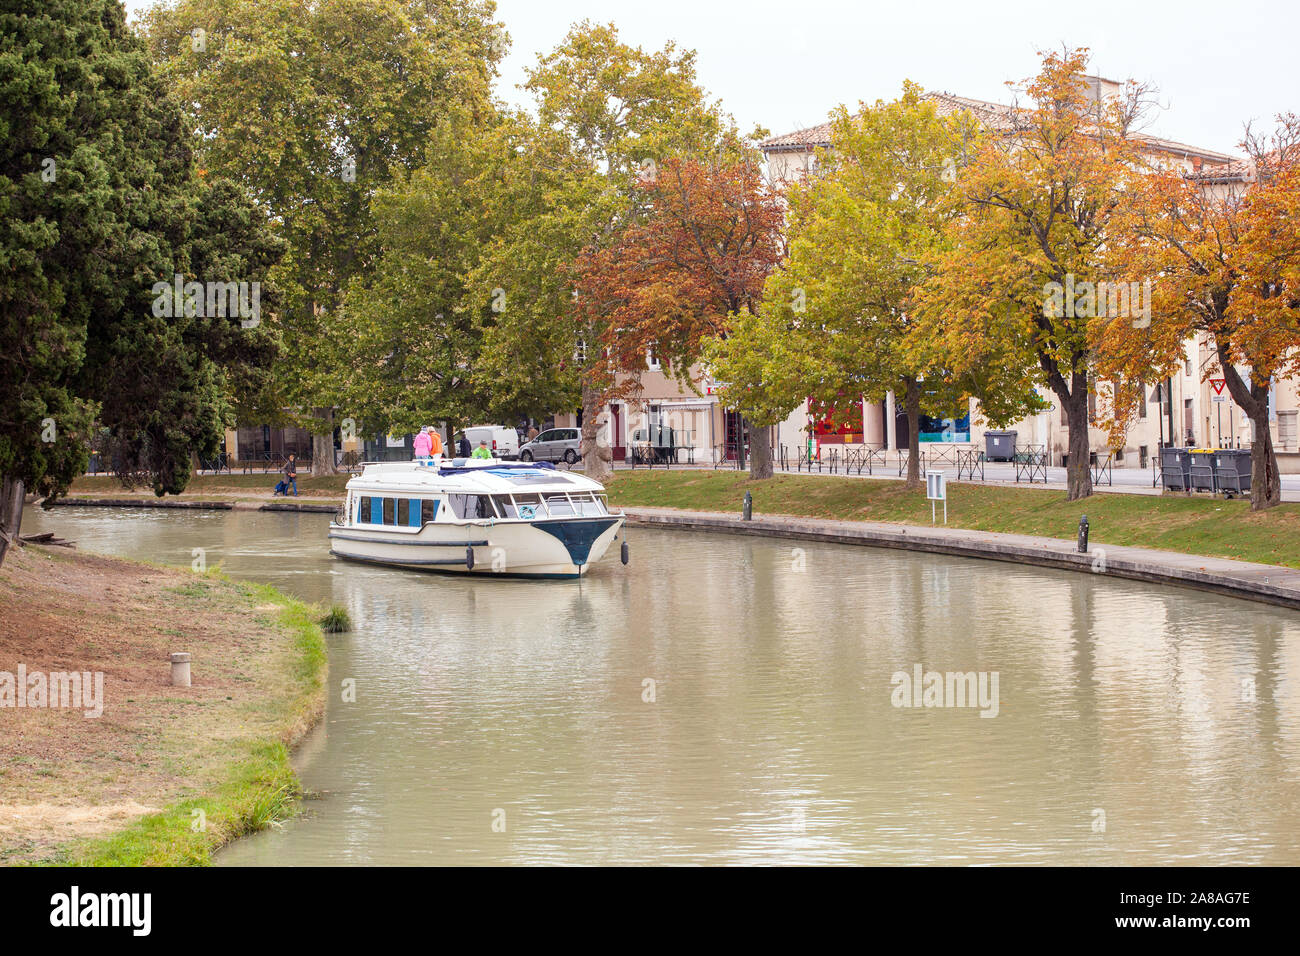 Family people driving a pleasure boat on the Canal du Midi in the French town of Carcassonne France during Autumn Stock Photo